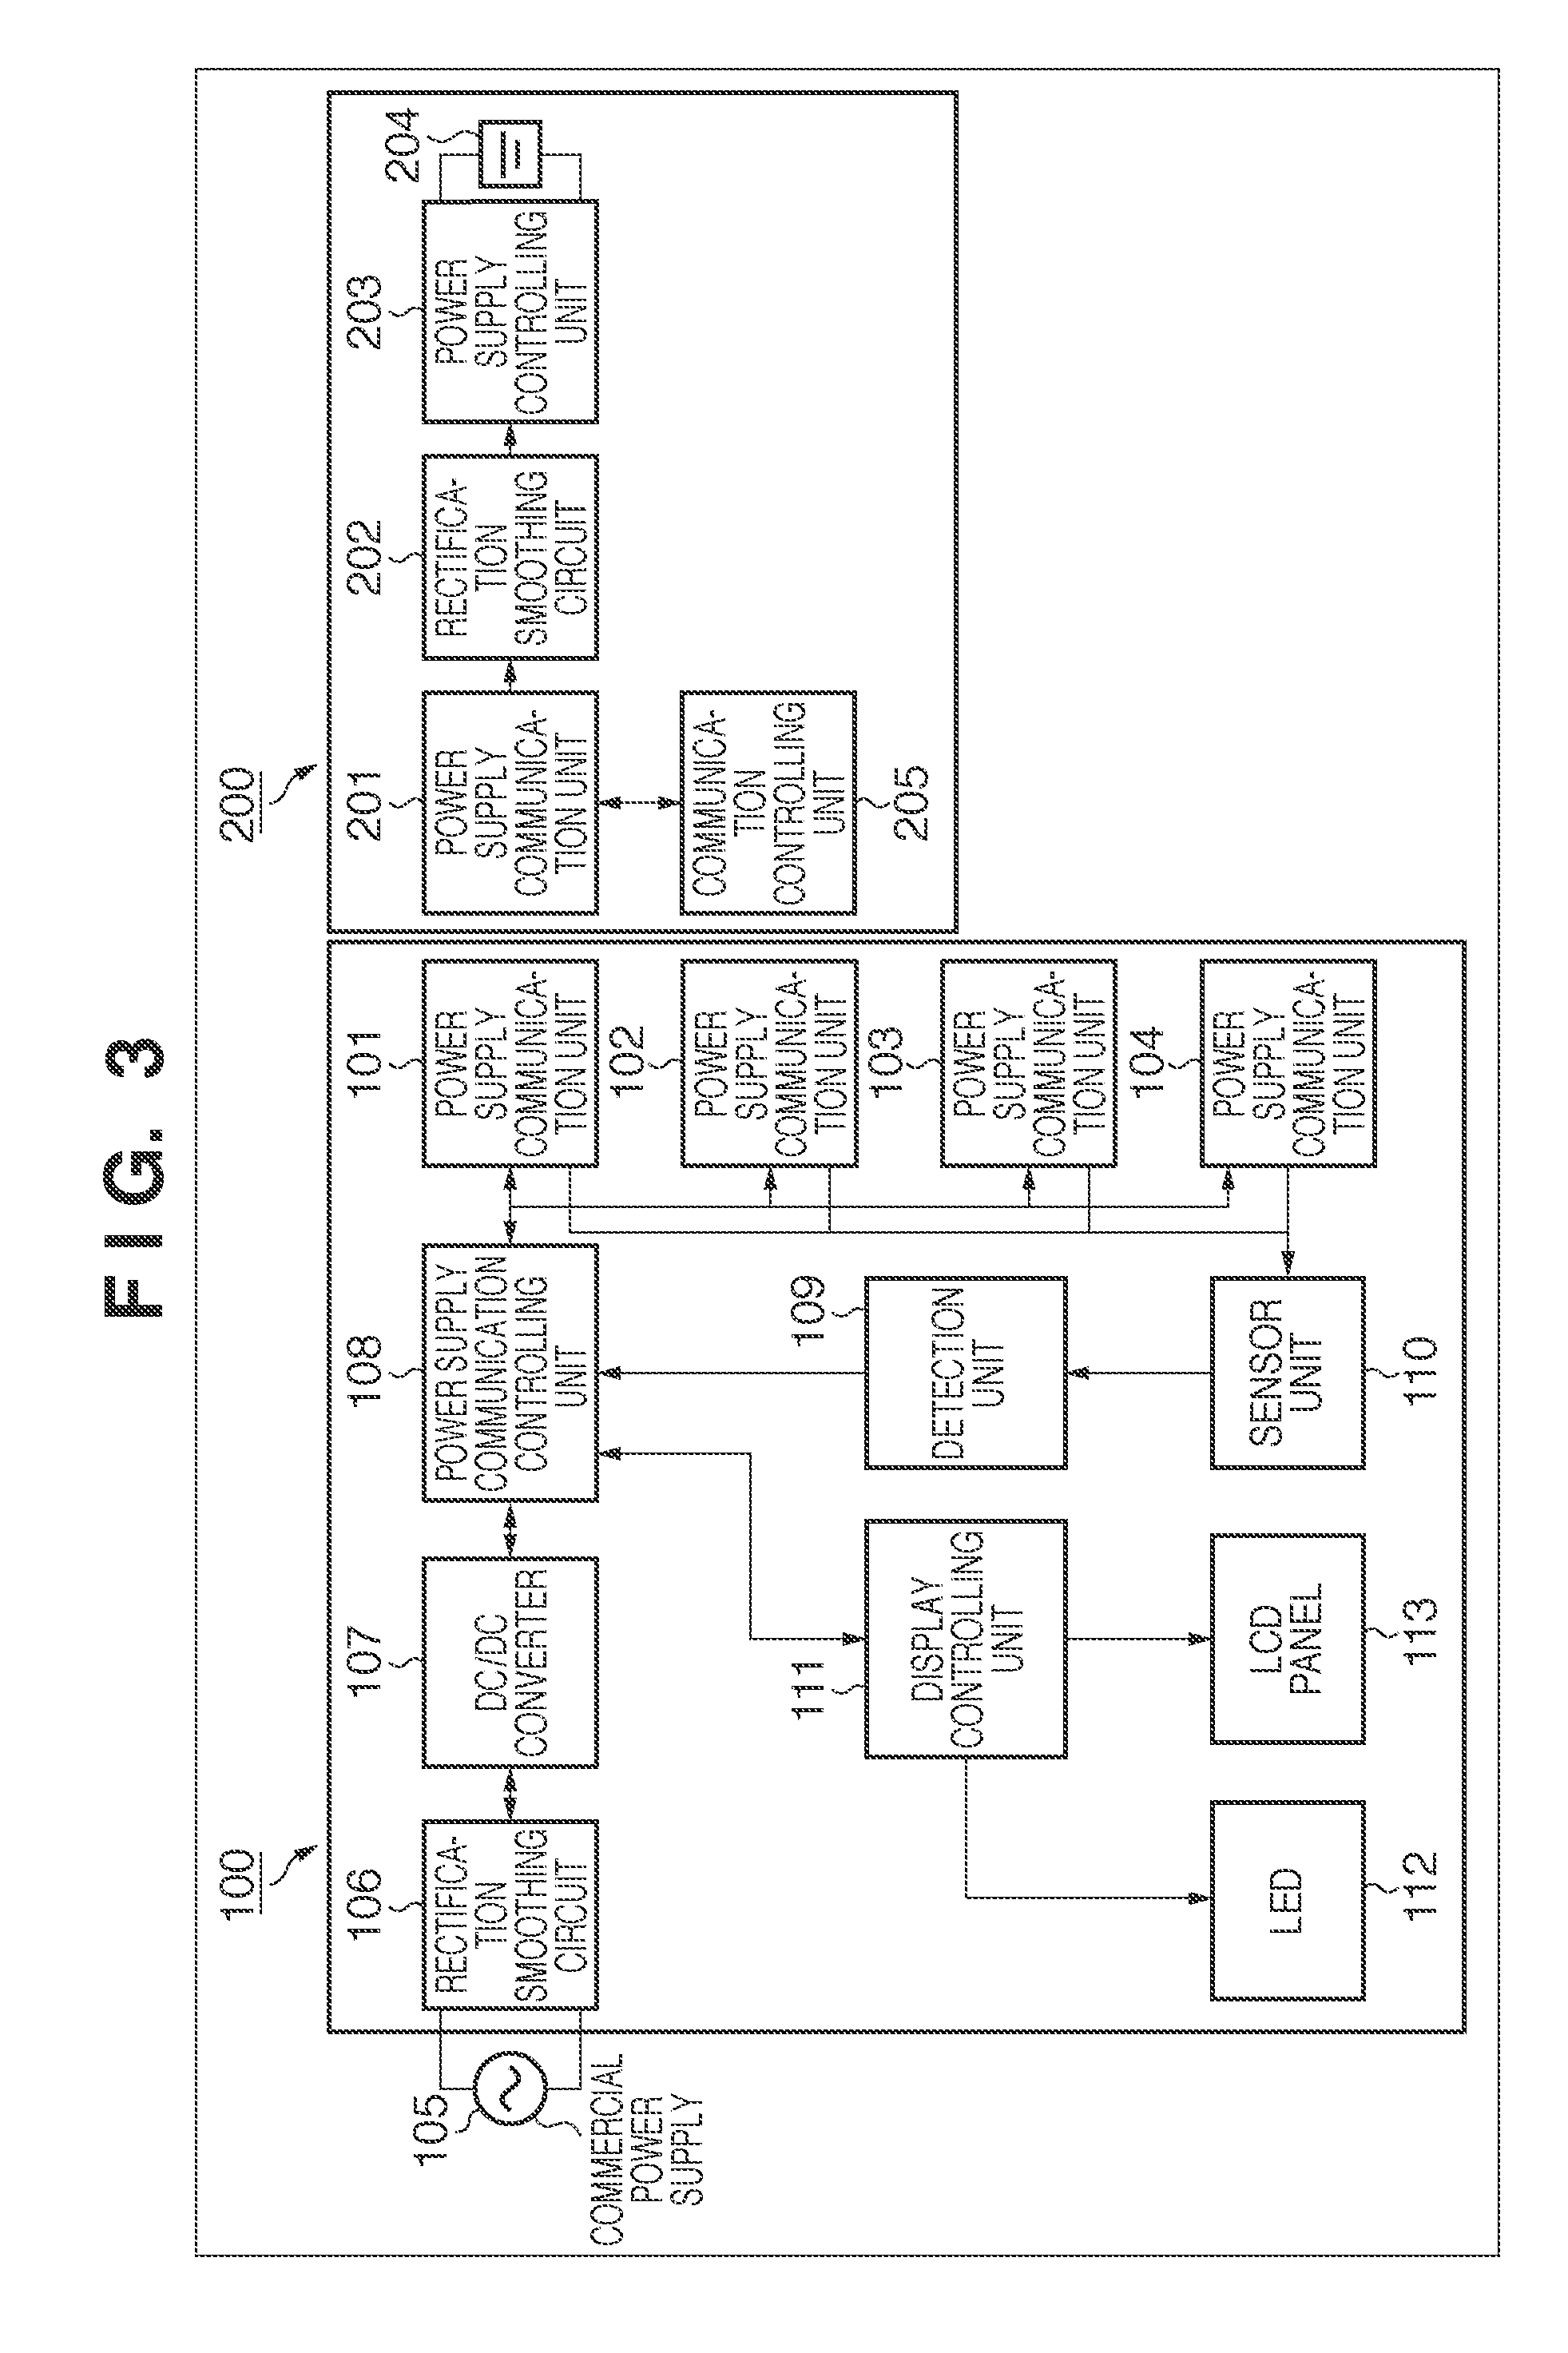 Power-supplying device, control method for the same, and power-supplying system